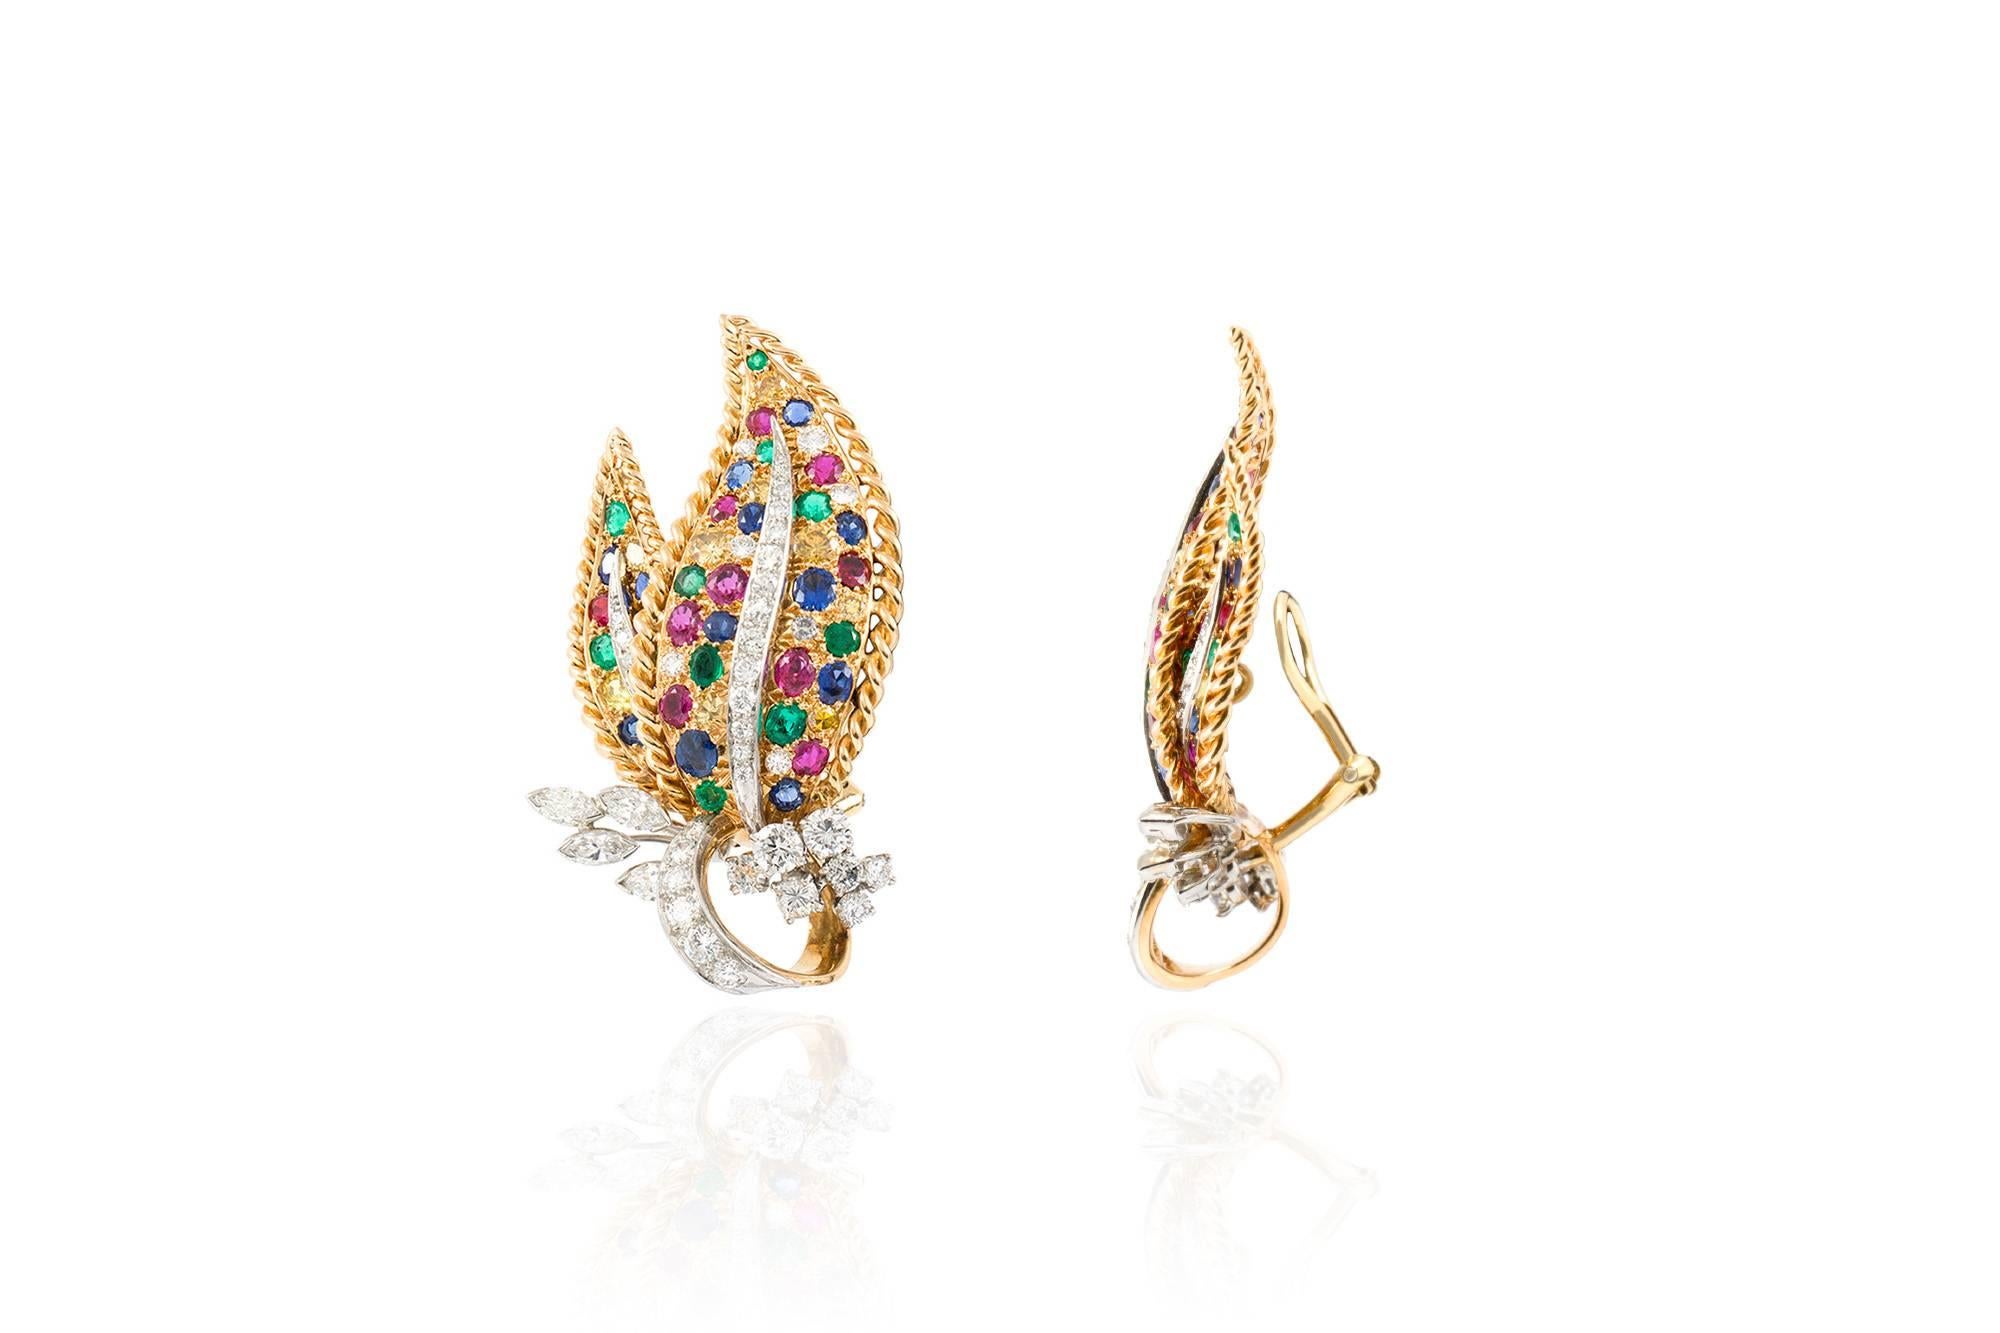 Leaf earrings, finely crafted in 18 k yellow and white gold with multi color stones and diamond. Signed Oscar Heyman.